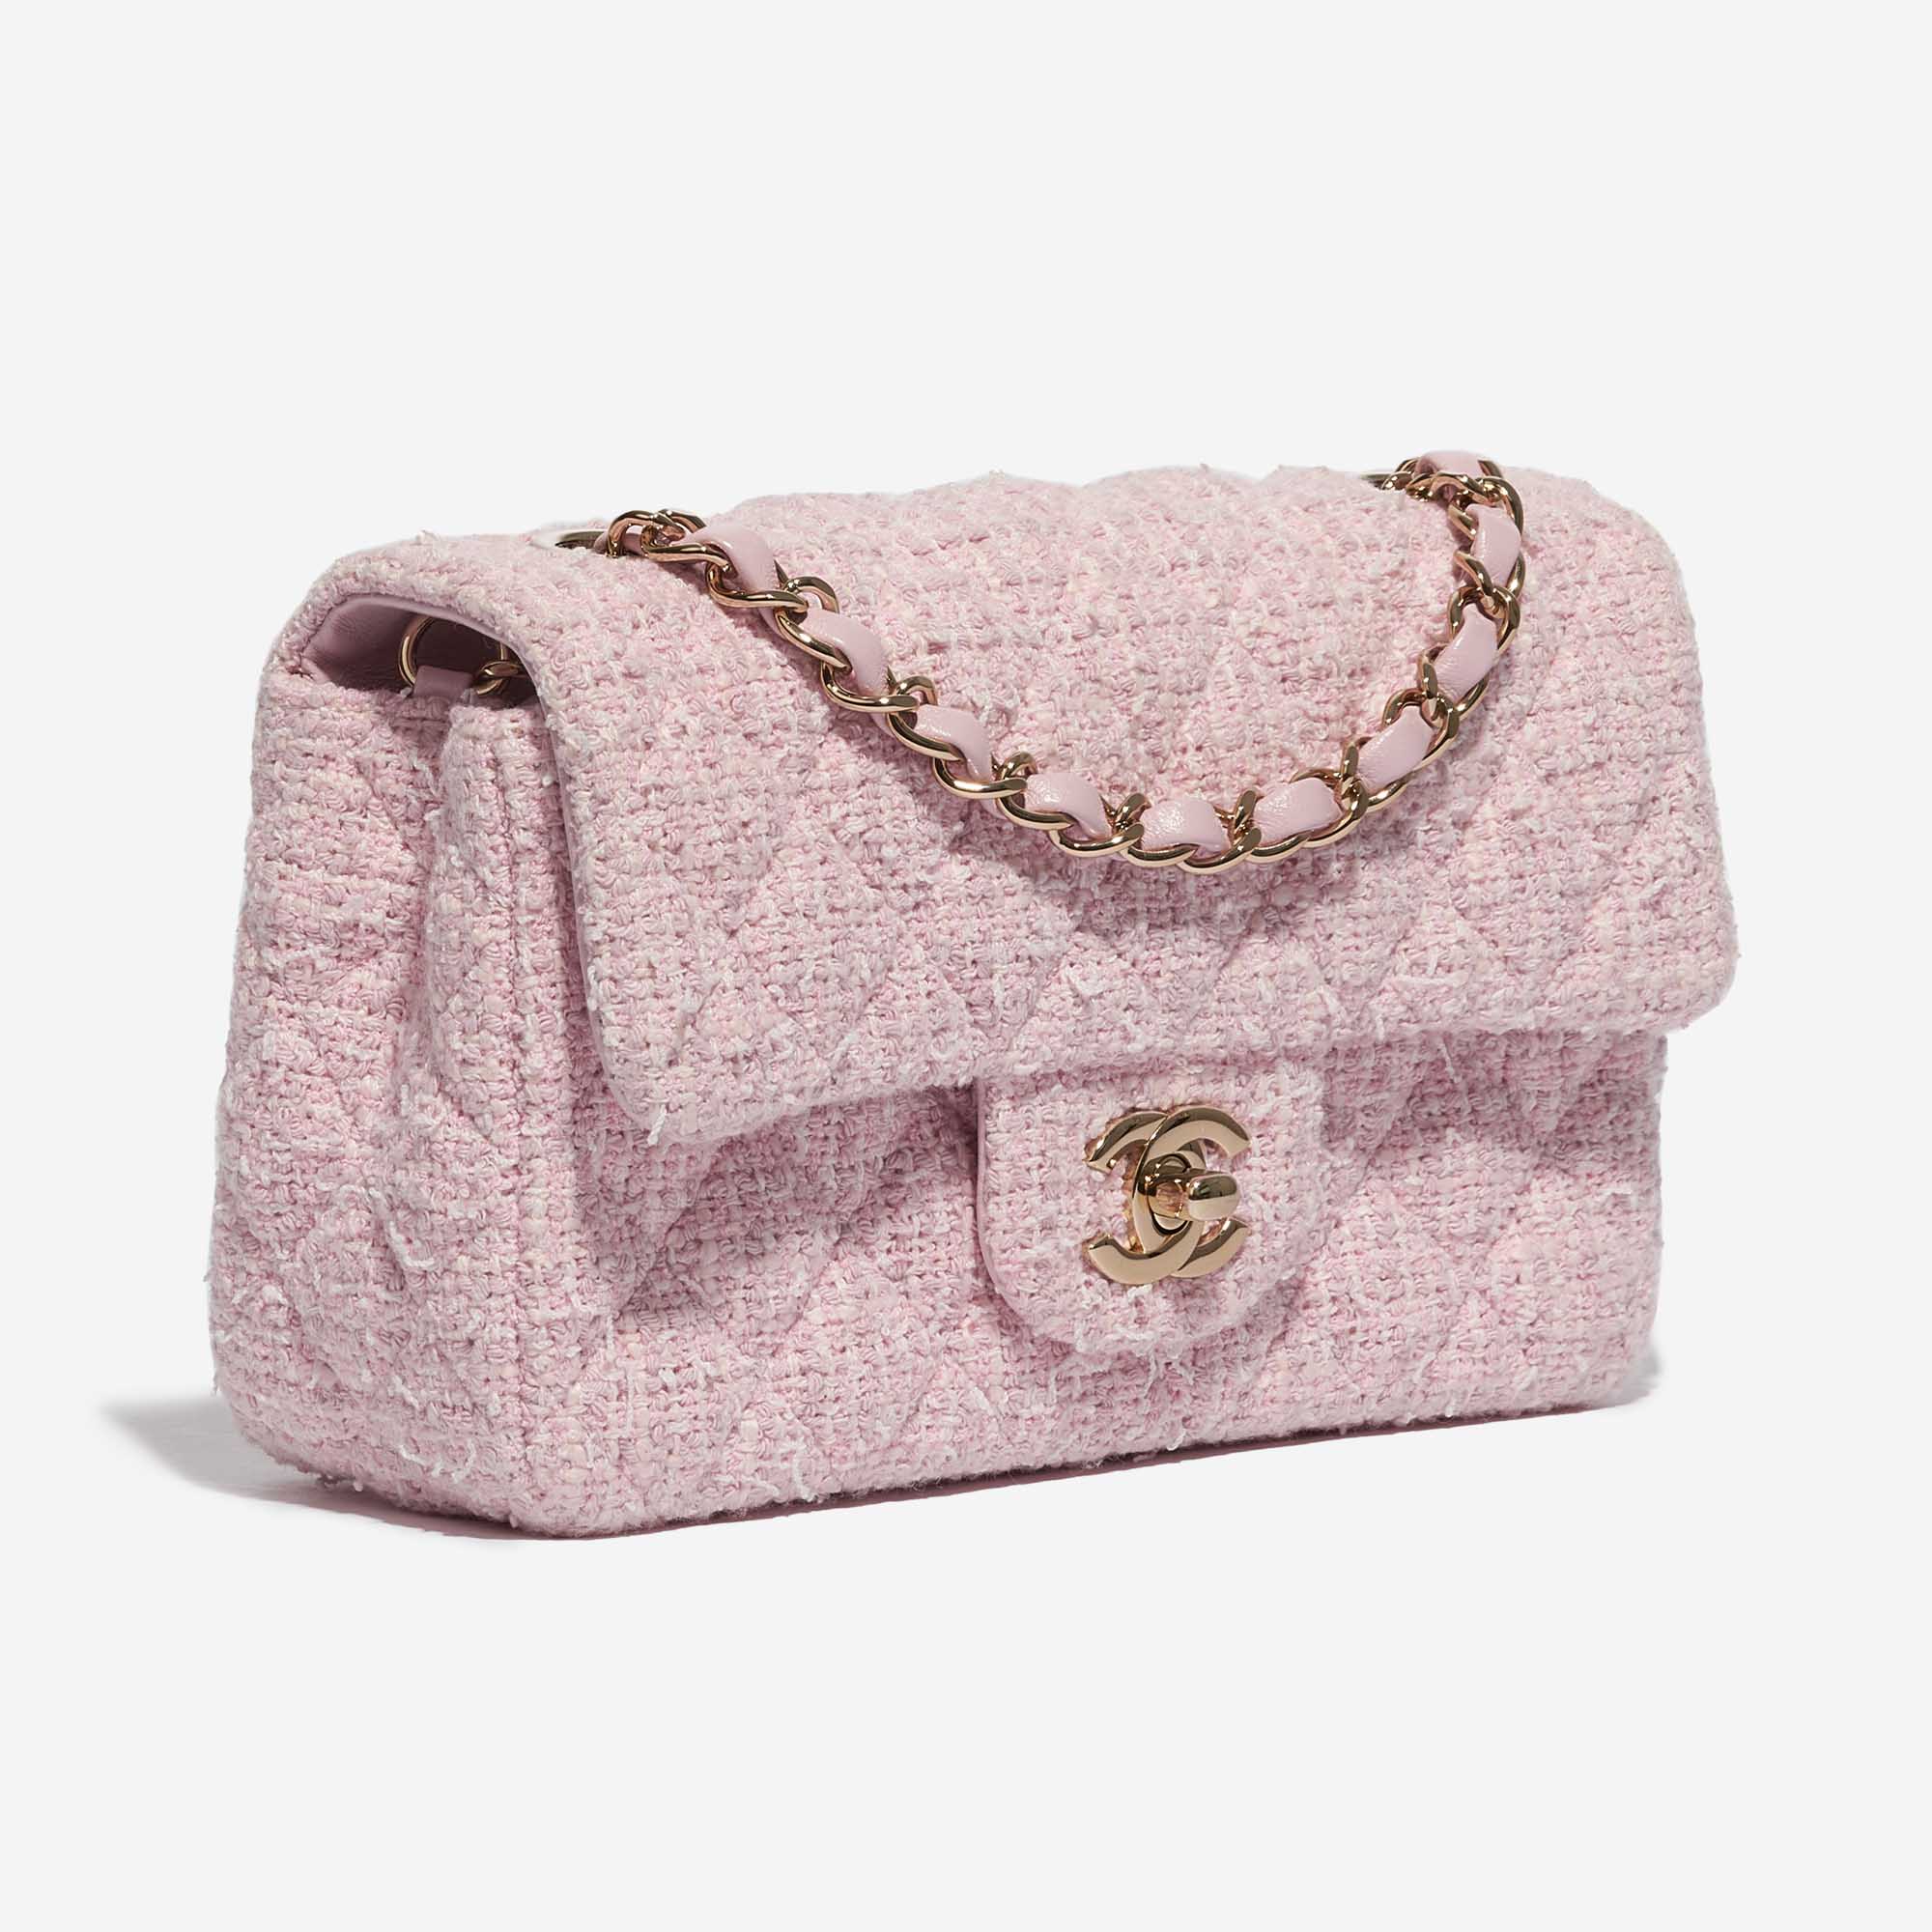 pink and white chanel purse